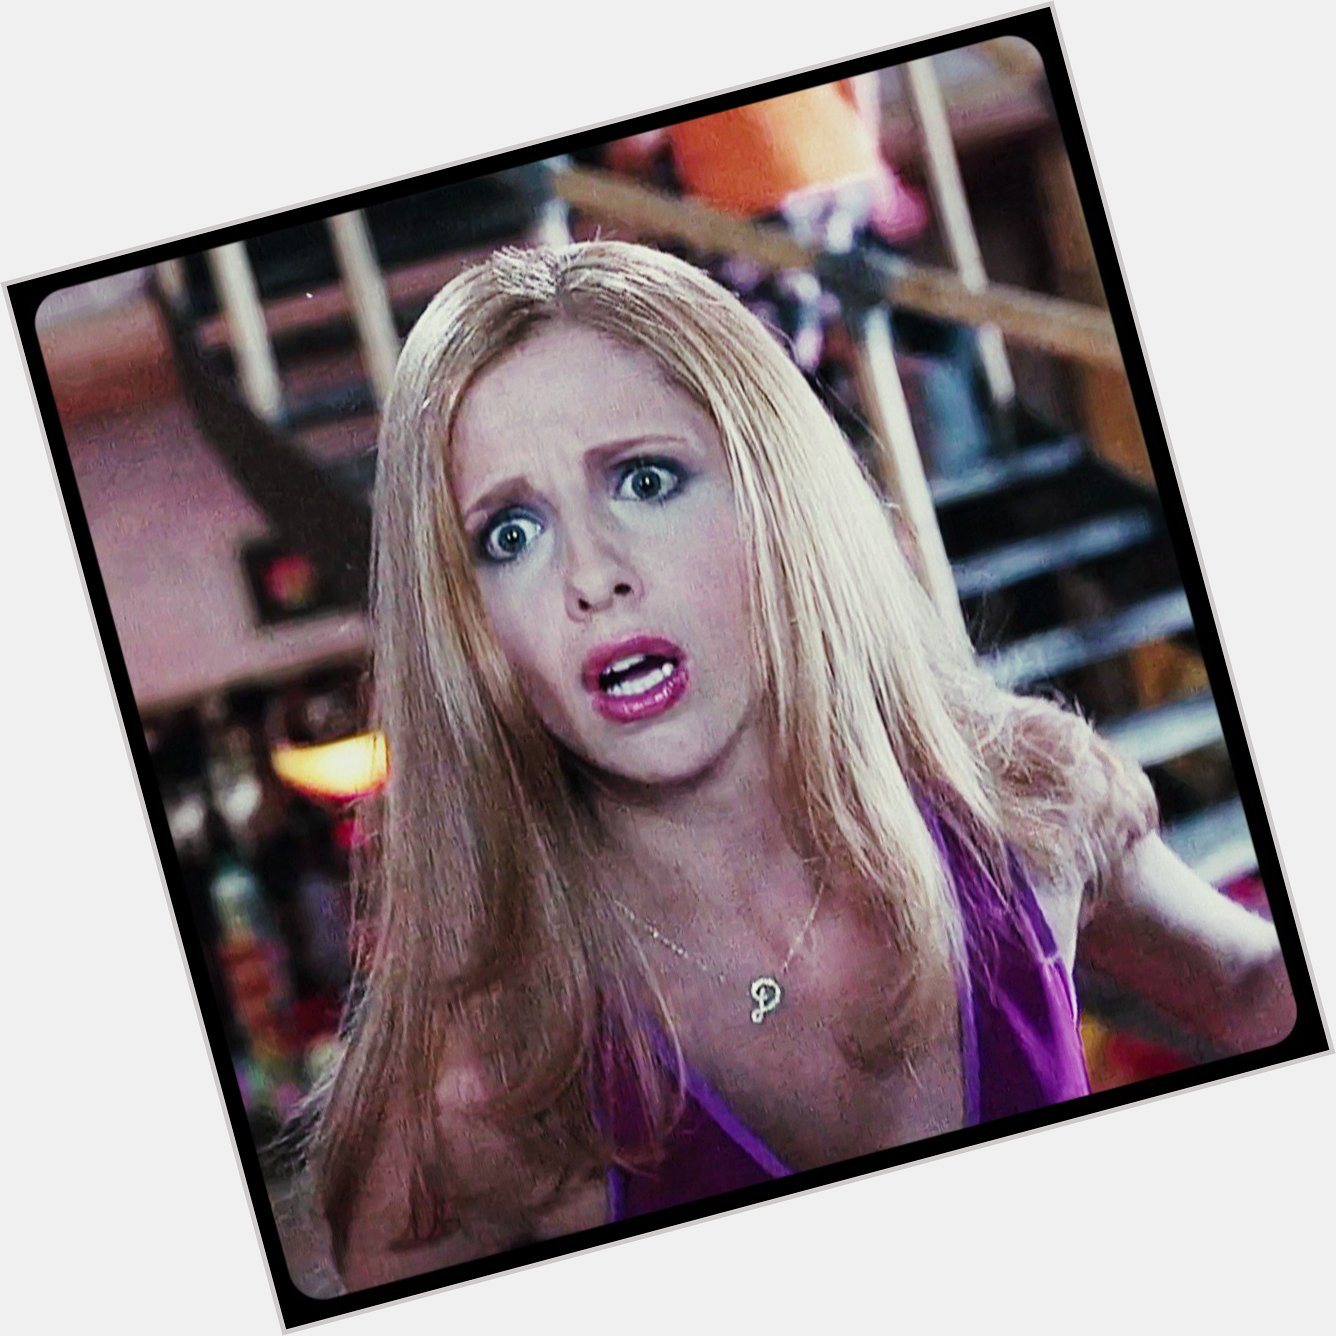 Sarah Michelle Gellar did a lot for our society as Daphne Blake   happy bday queen 